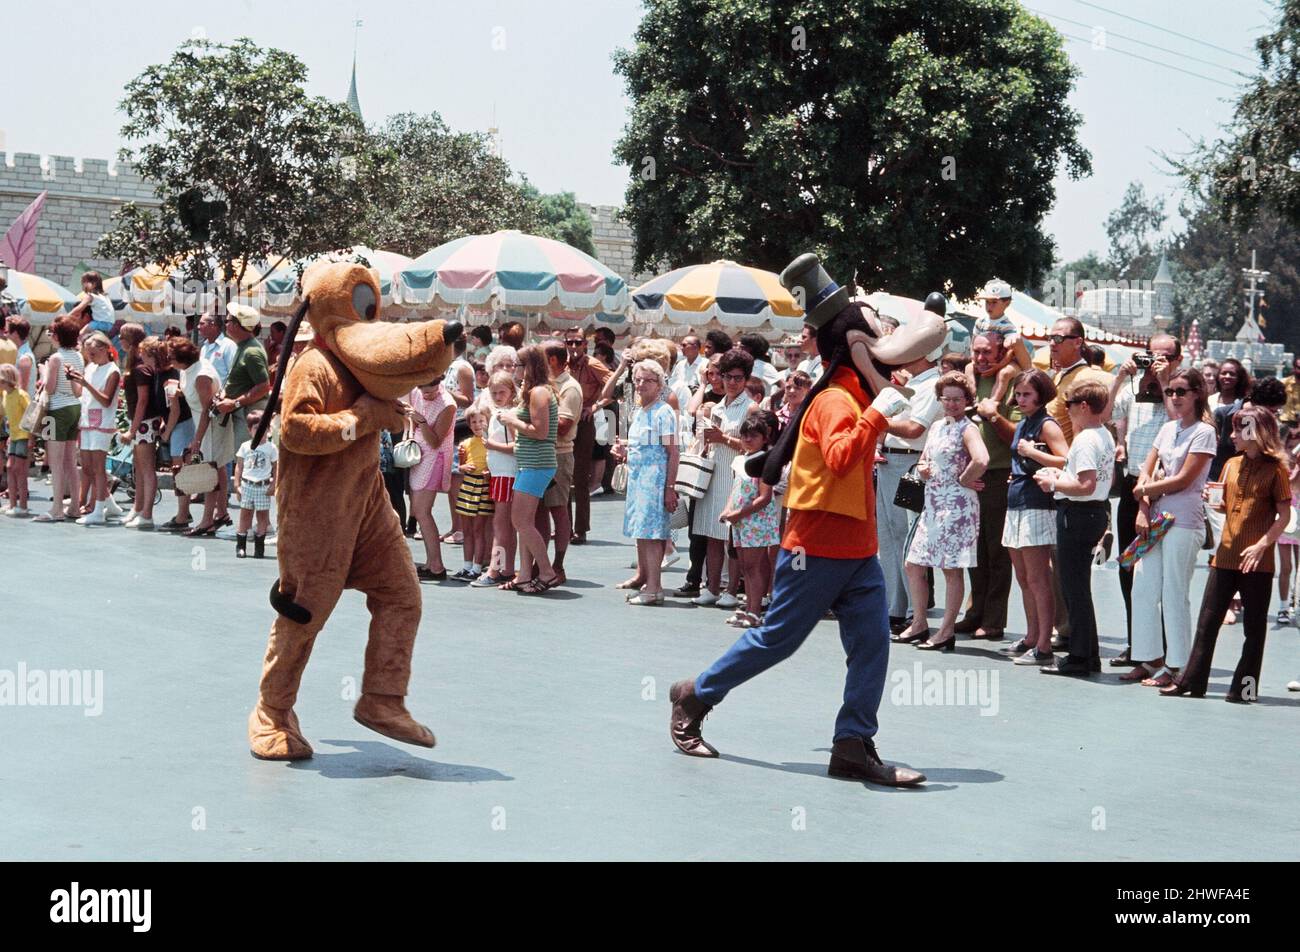 Scenes at the Disneyland theme park in Anaheim, California, United States. Disney canine characters Pluto and Goofy during the Main Street parade. June 1970. Stock Photo